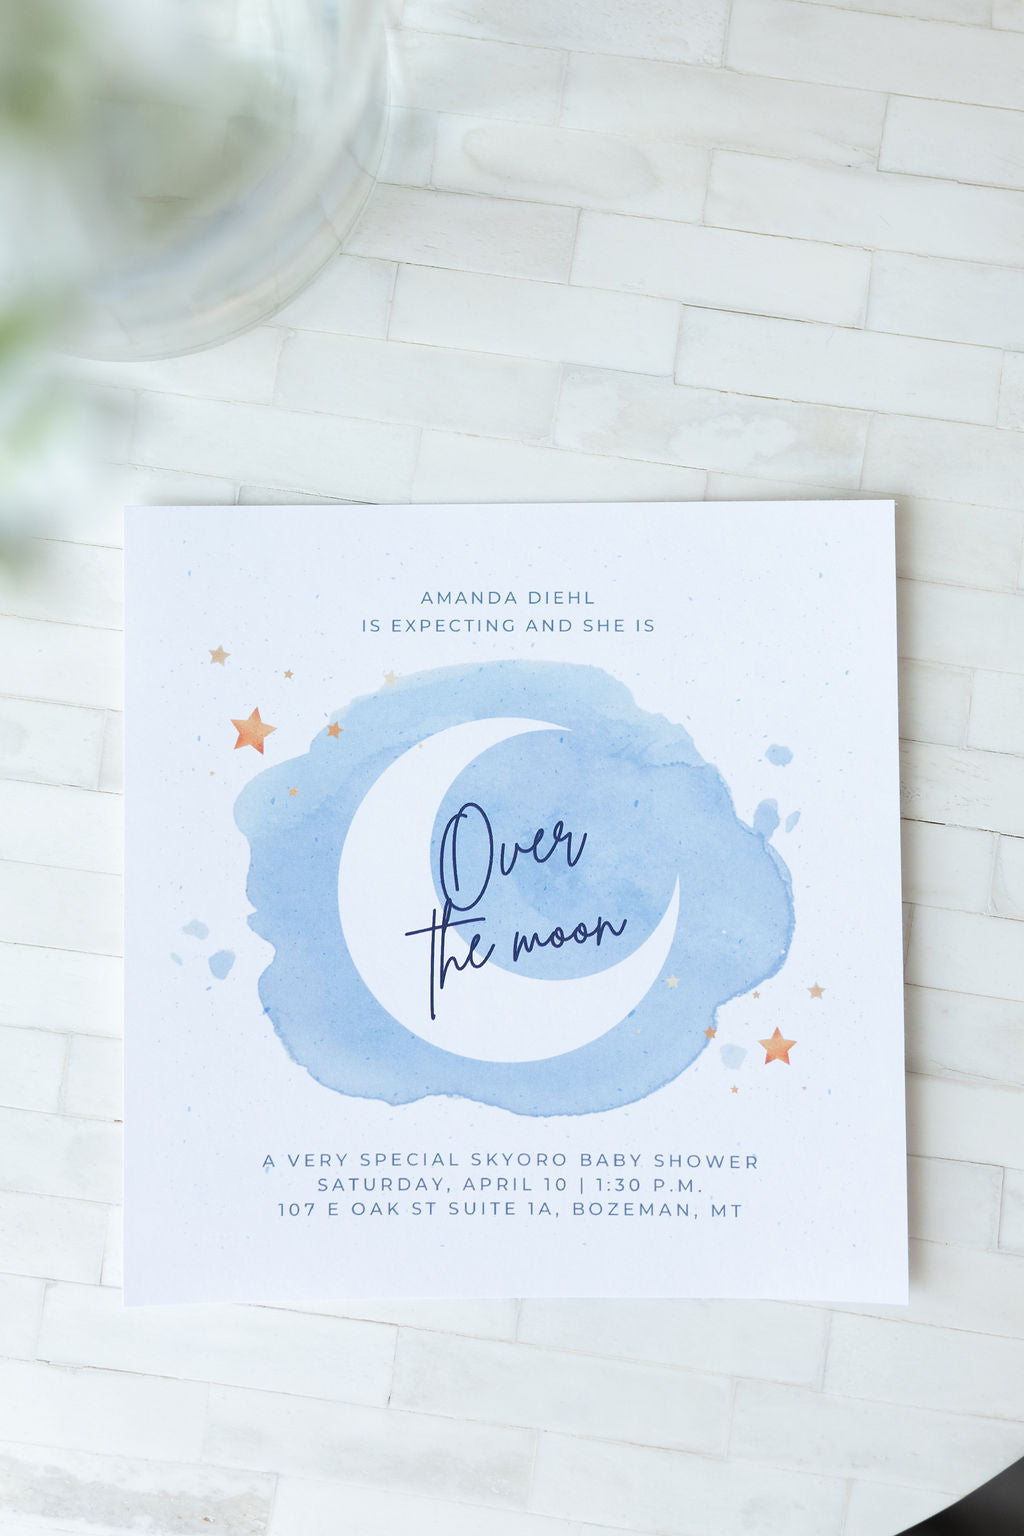 A Magical "Over The Moon" Baby Shower